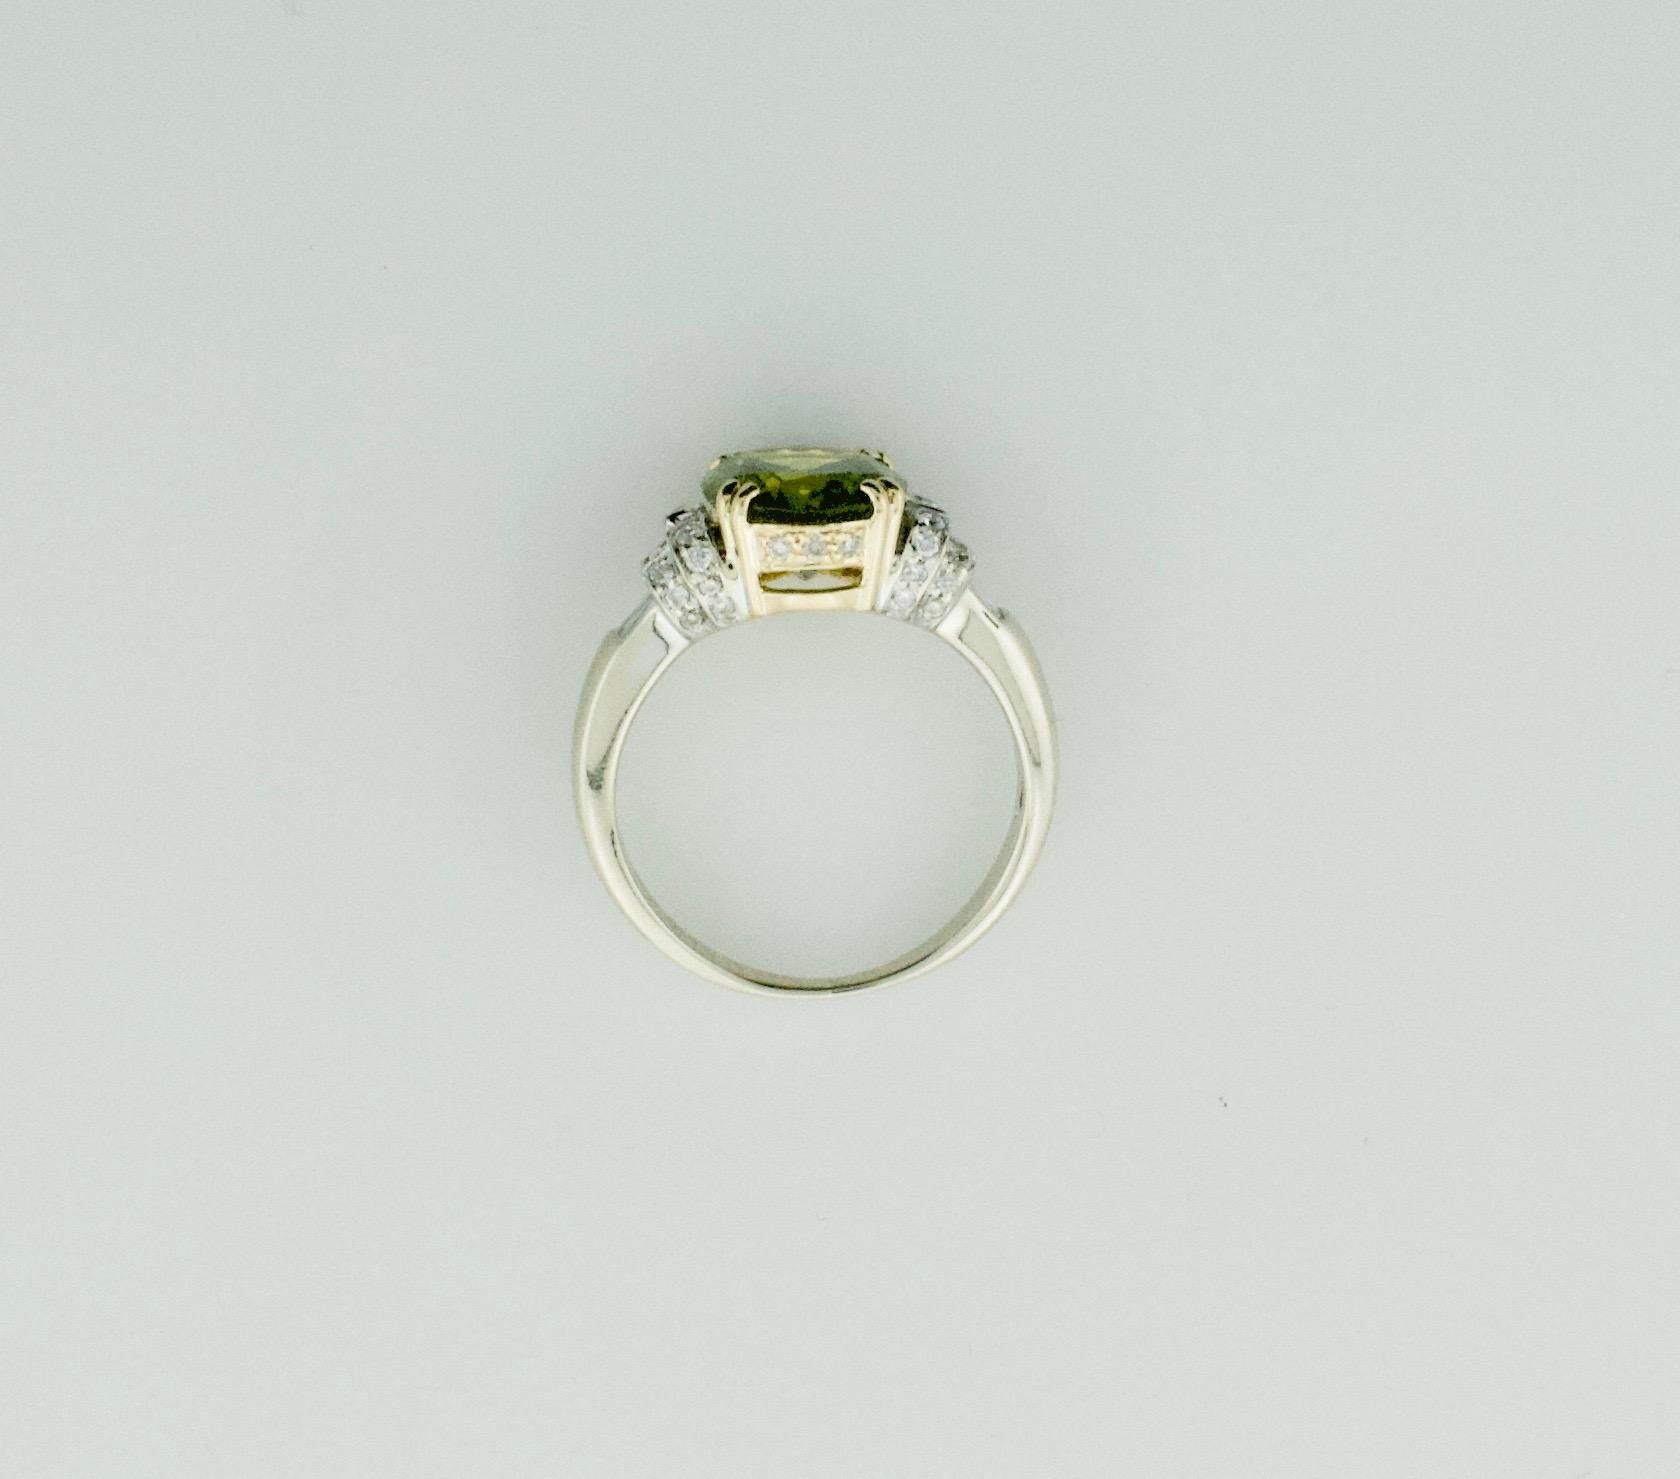 Peridot and Diamond Solitaire Ring in 18k In Excellent Condition For Sale In Wailea, HI